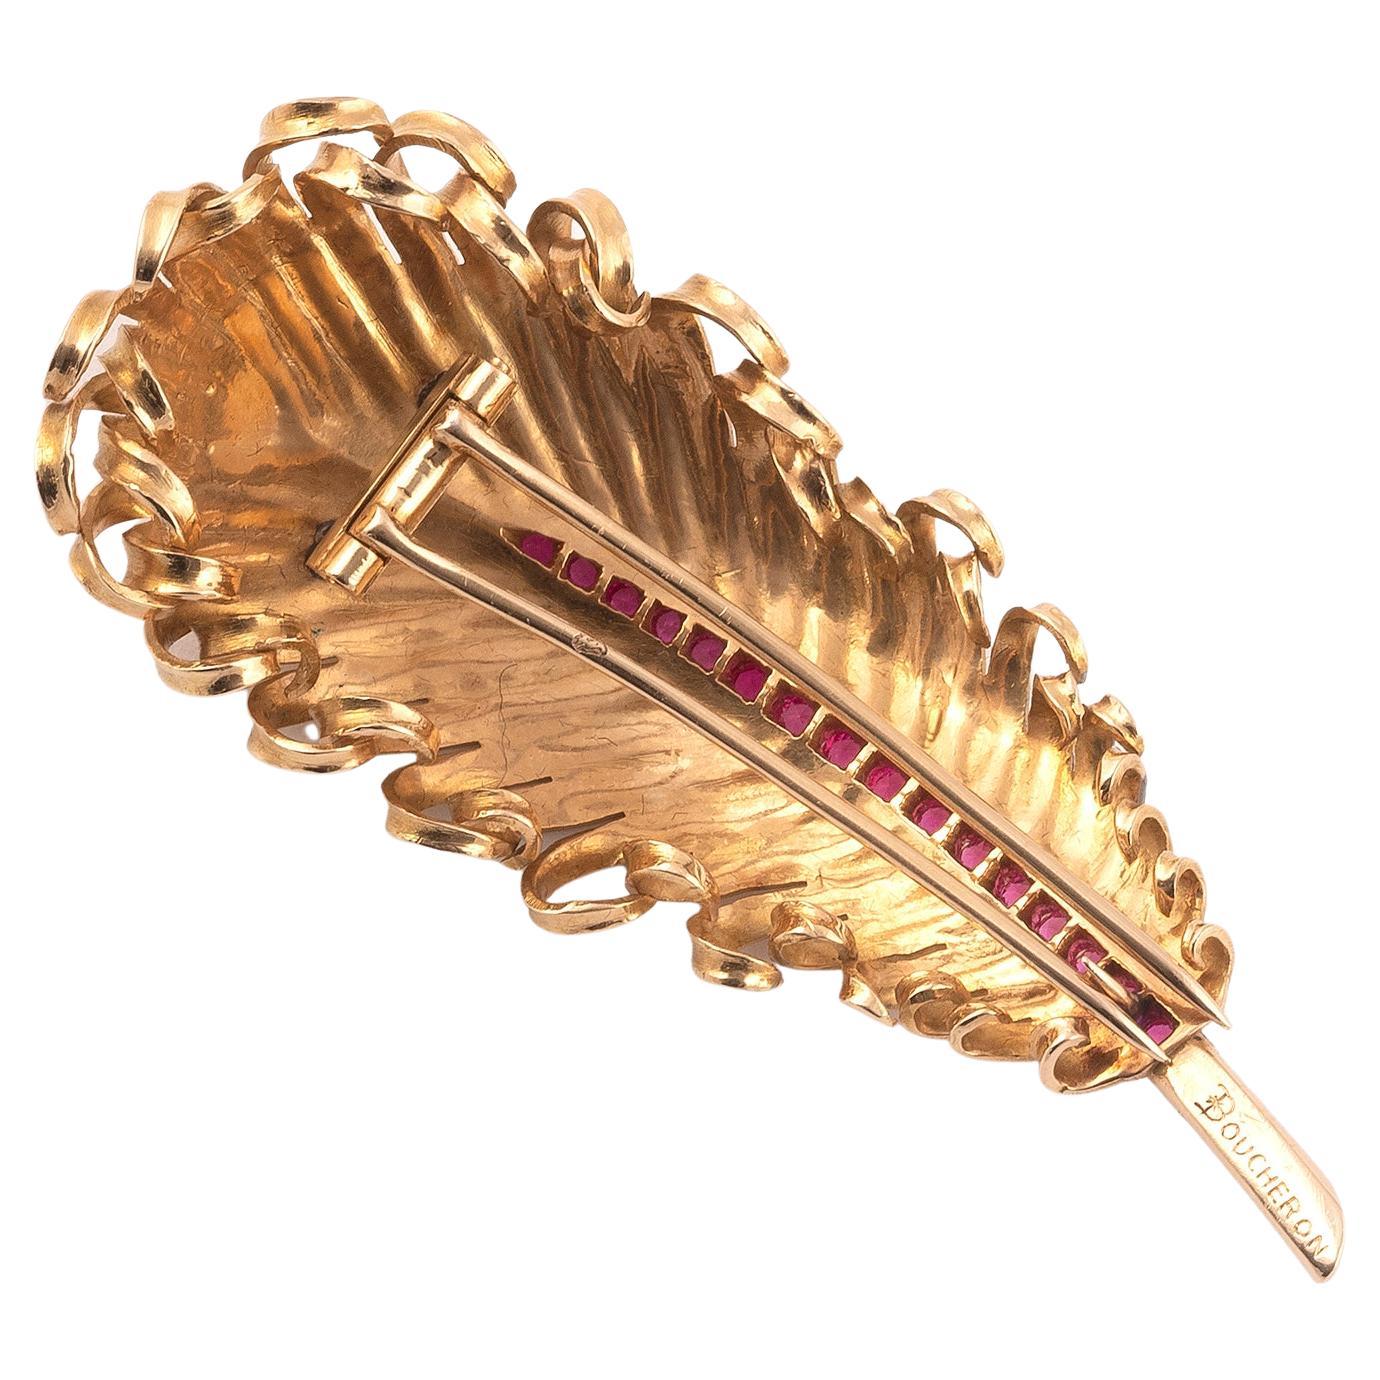 Yellow gold feather brooch finished with rubies, approx. g 20.52, length cm. approximately 6.80 cm. Signed Boucheron and French assay marks.